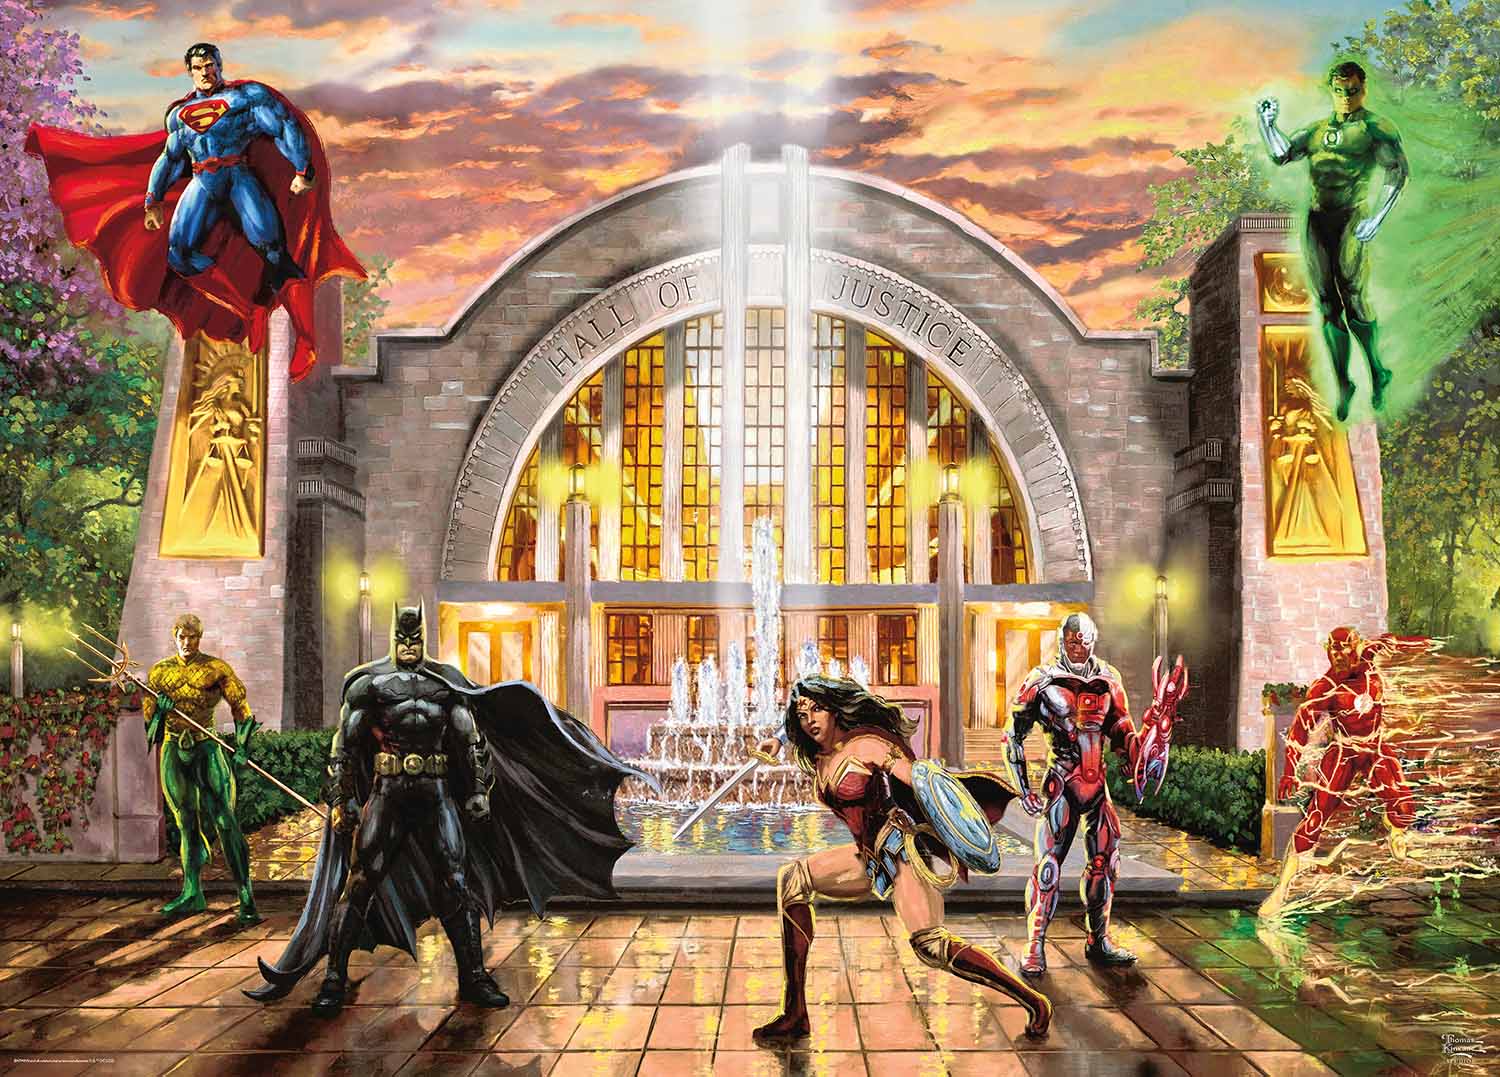 DC Comics Hall of Justice Movies & TV Jigsaw Puzzle